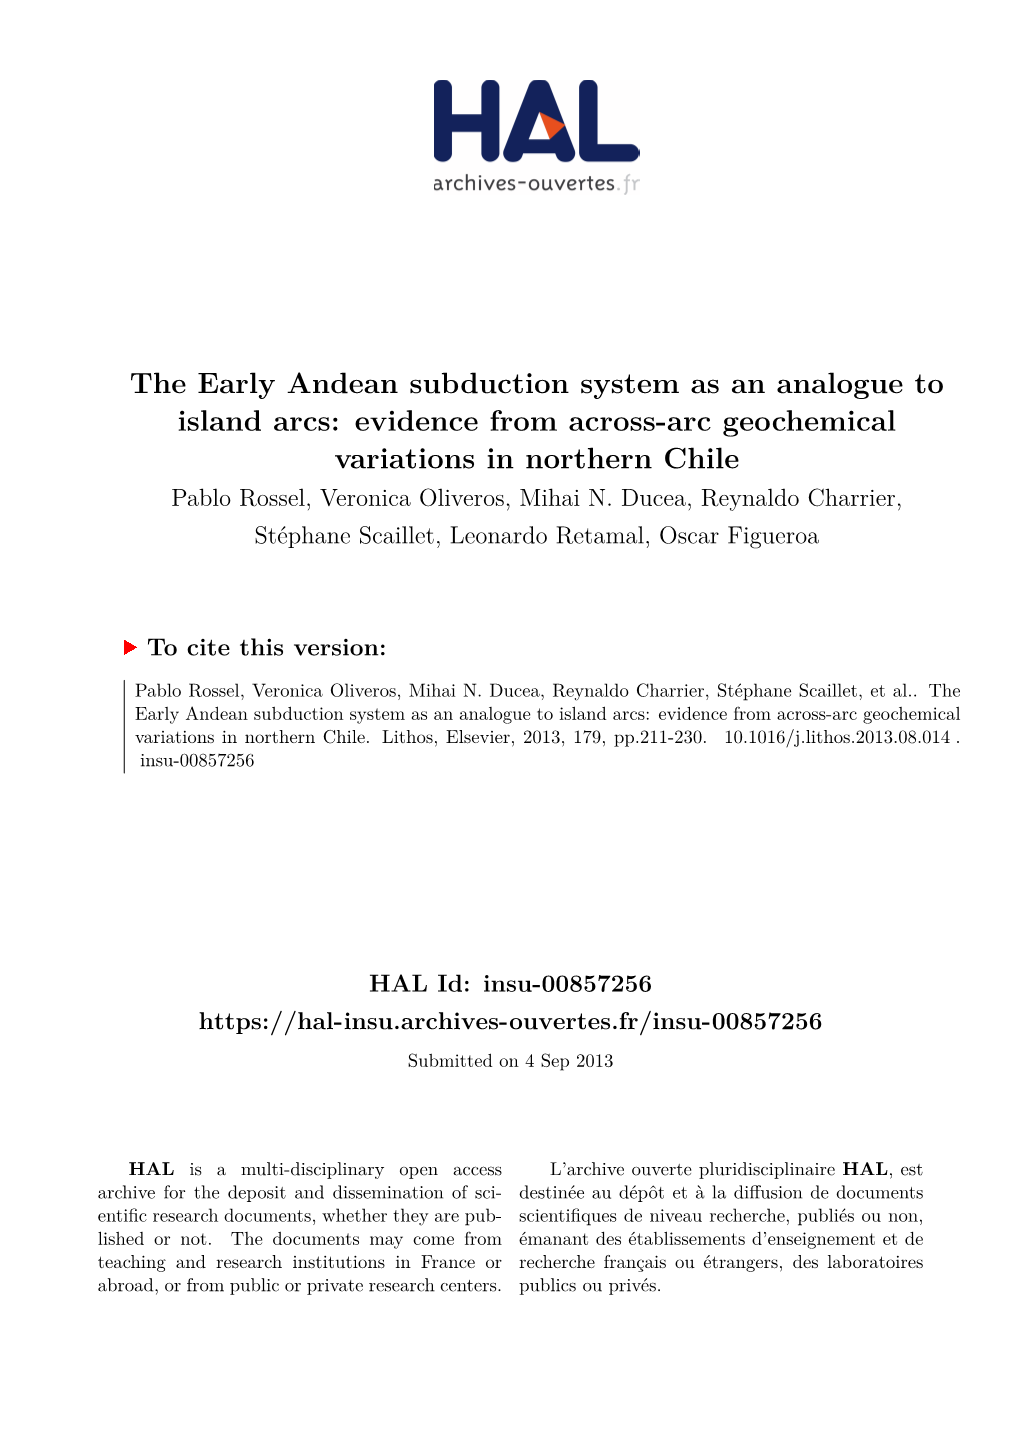 The Early Andean Subduction System As an Analogue to Island Arcs: Evidence from Across-Arc Geochemical Variations in Northern Ch